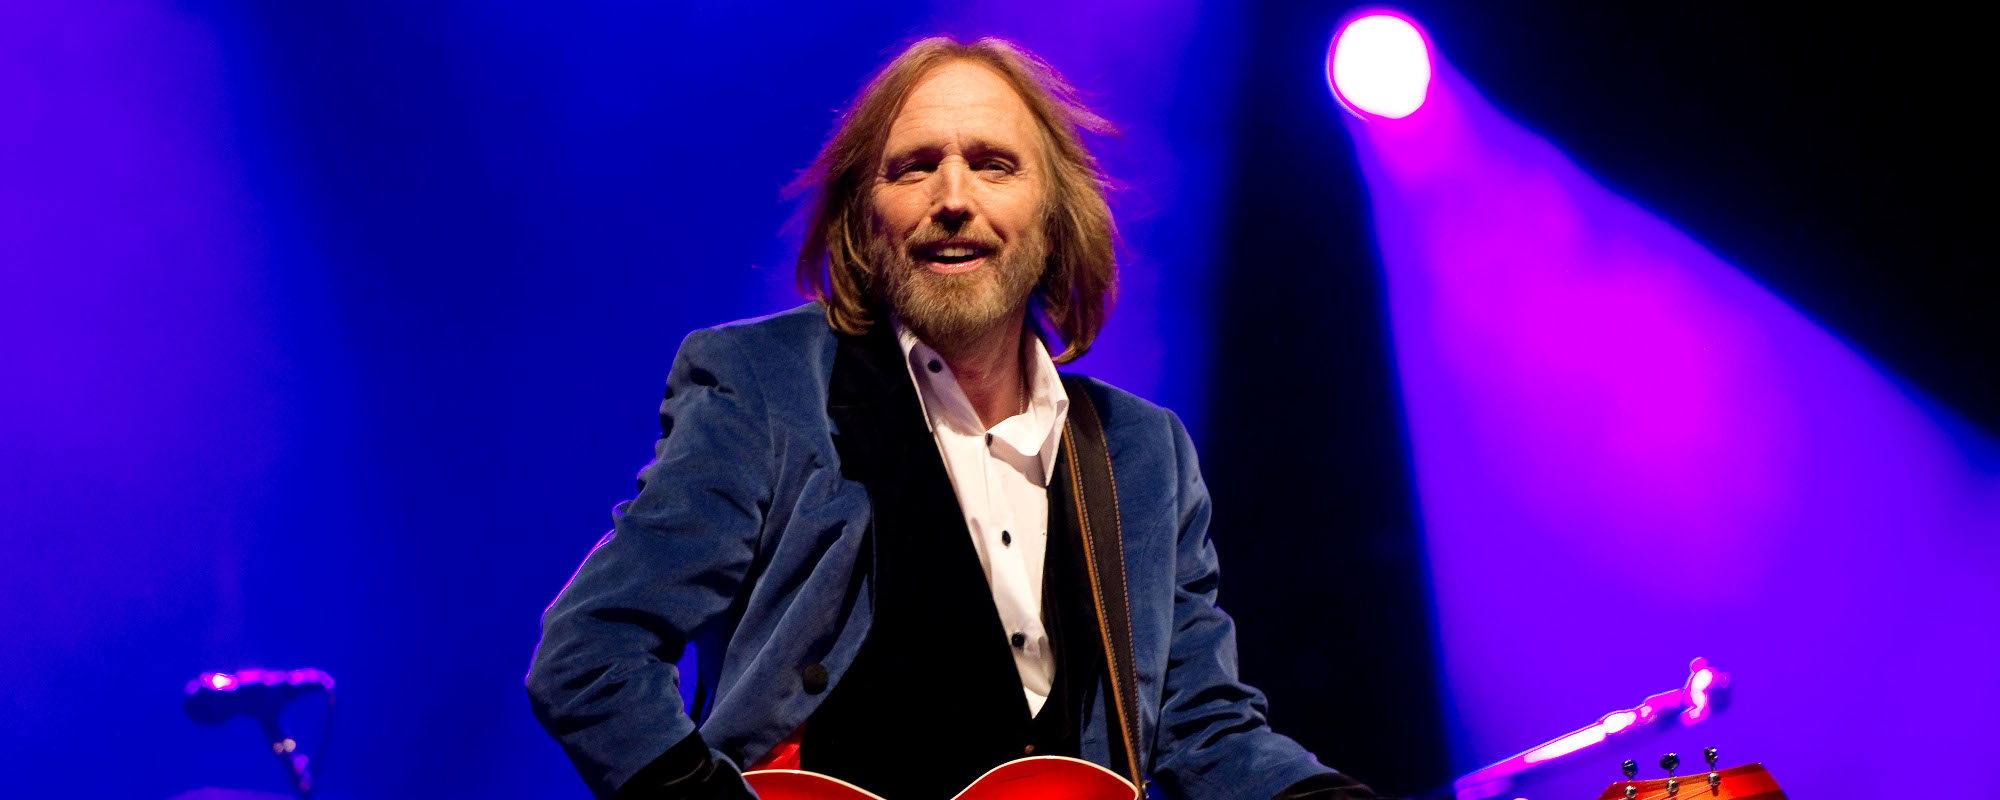 3 of the Best Deep Cuts from Tom Petty’s Standout Discography